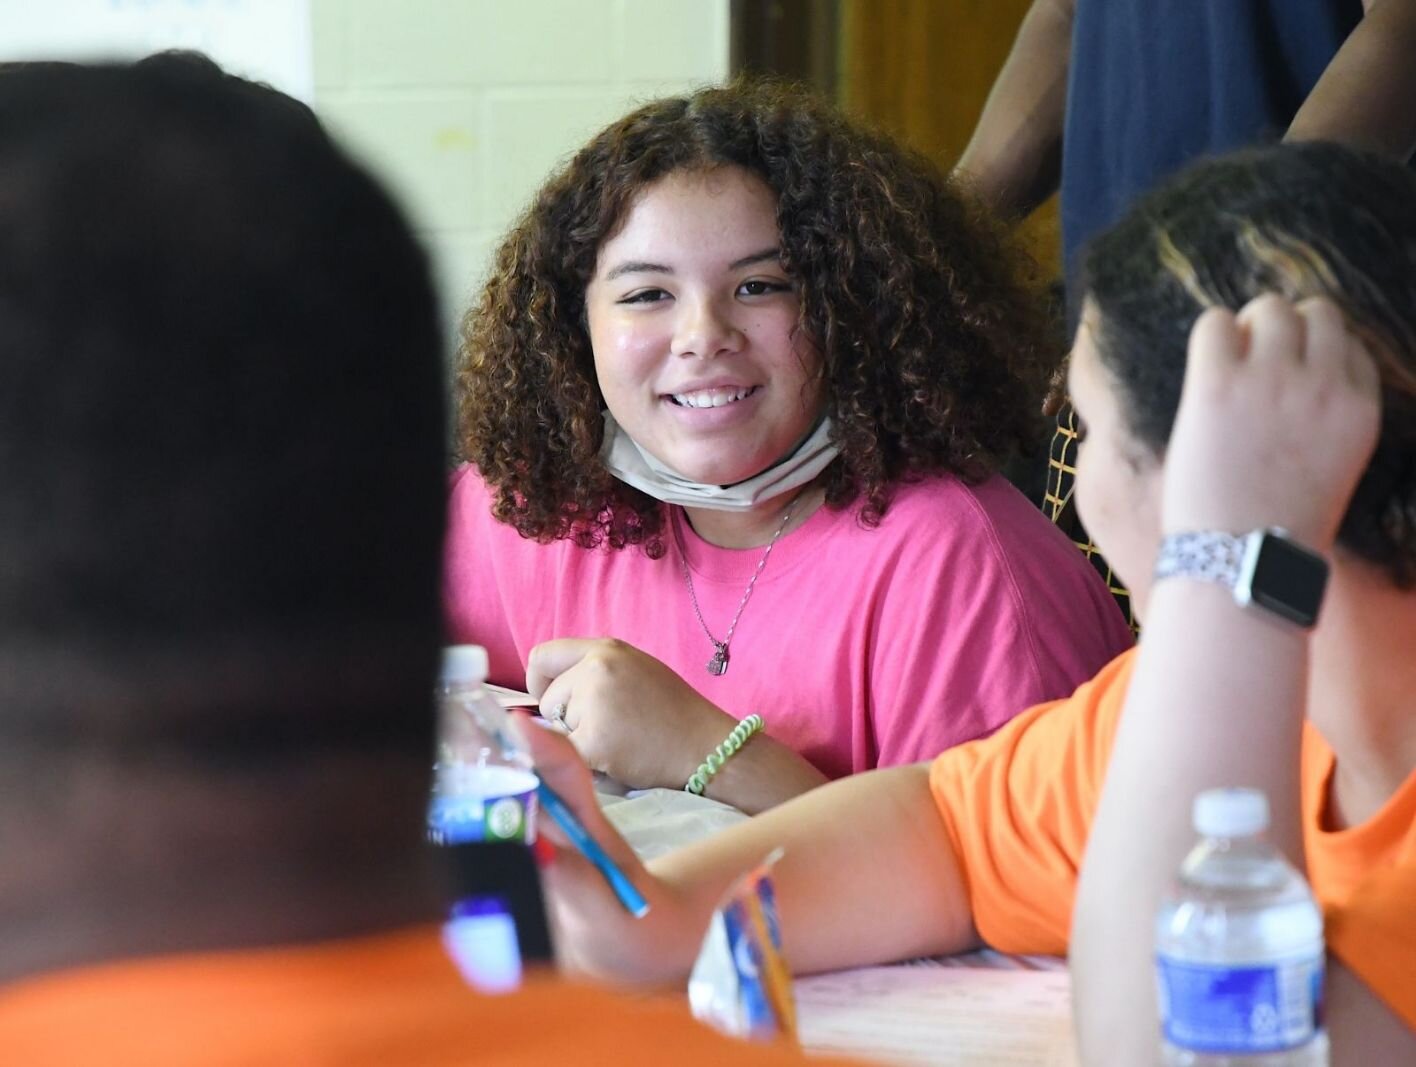 Makyla Gibson, 12, listens to the instructor during a RISE summer program session.